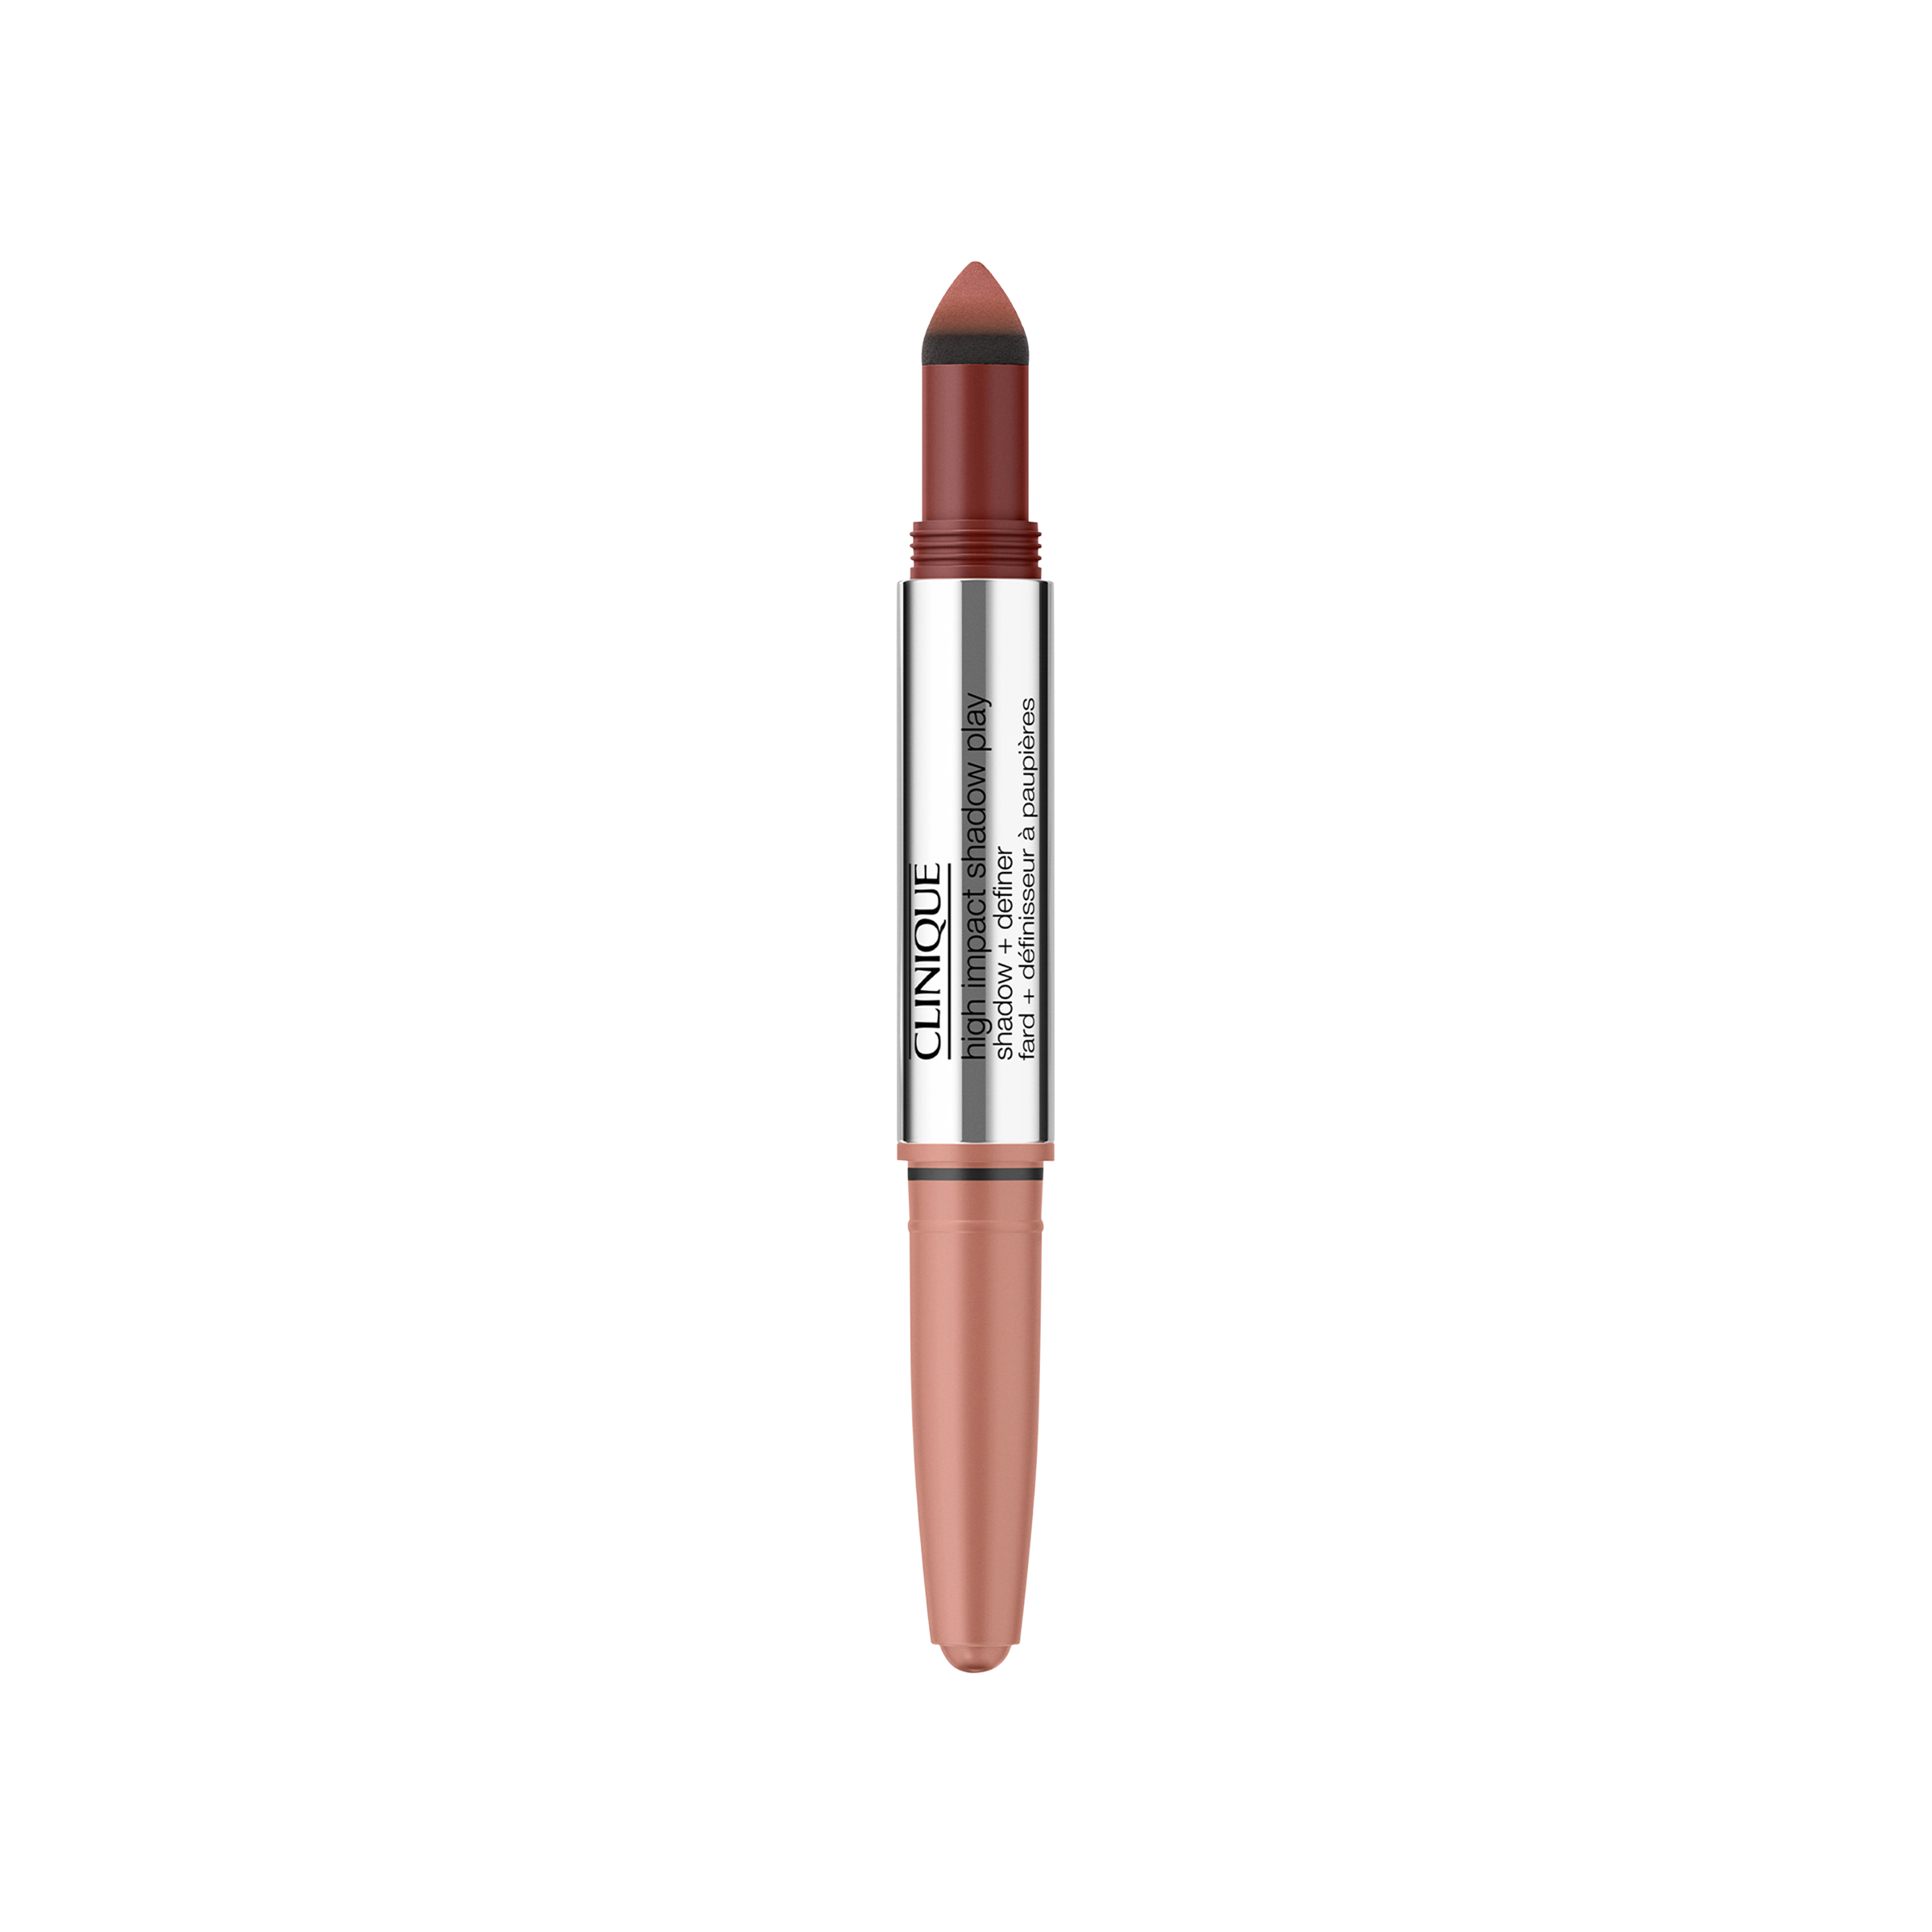 clinique high impact shadow playâ„¢ shadow & definer 1,9 g, 03 - strawberry and chocolate